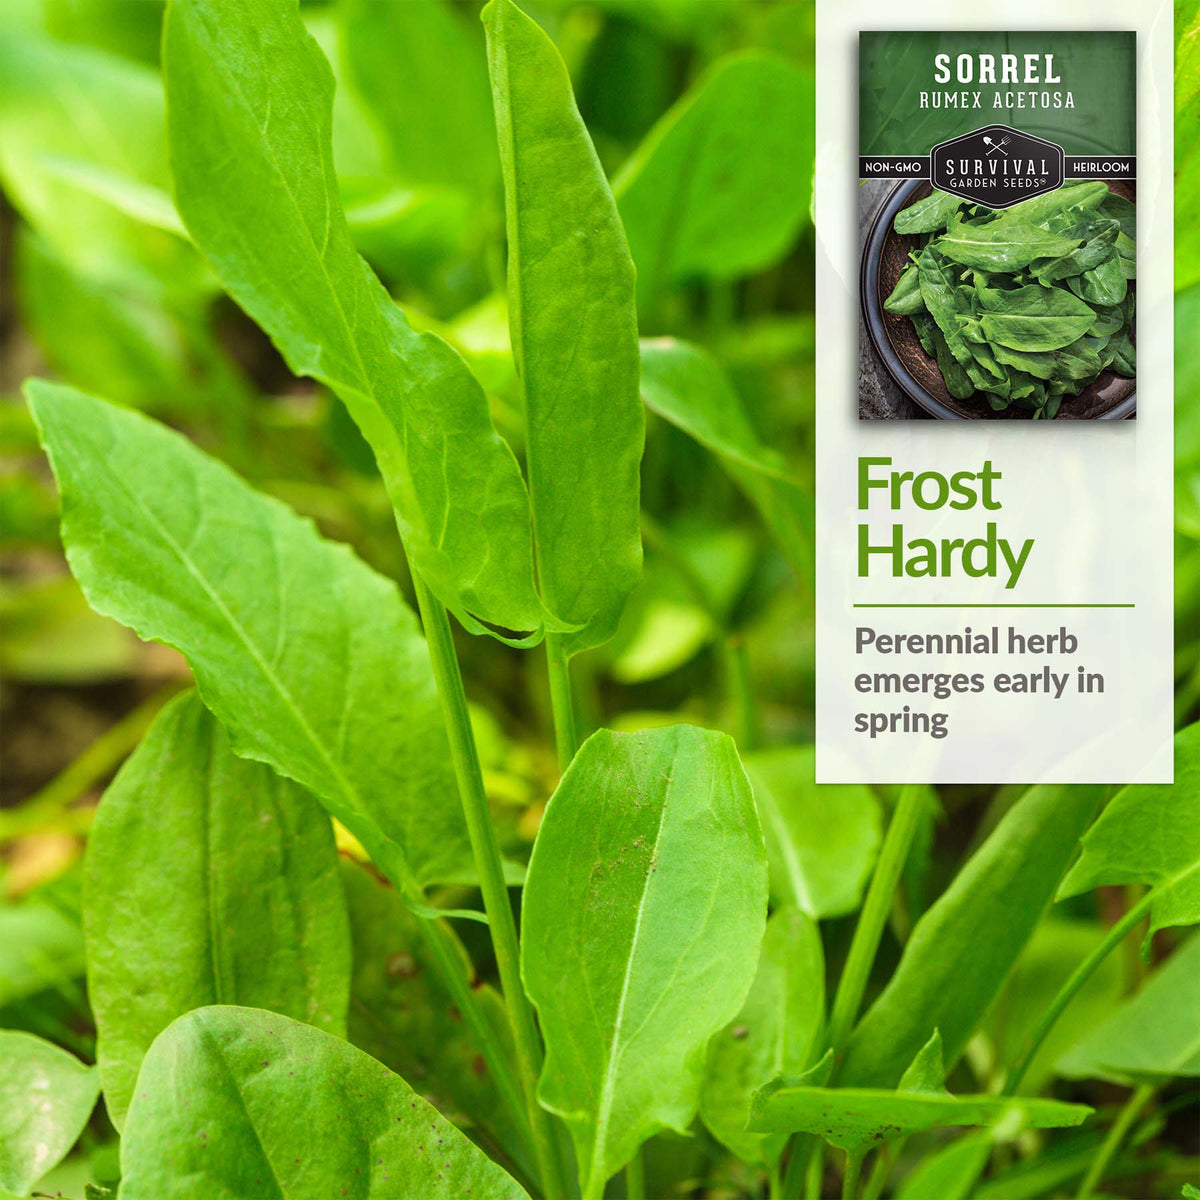 Sorrel is a frost hardy perennial herb